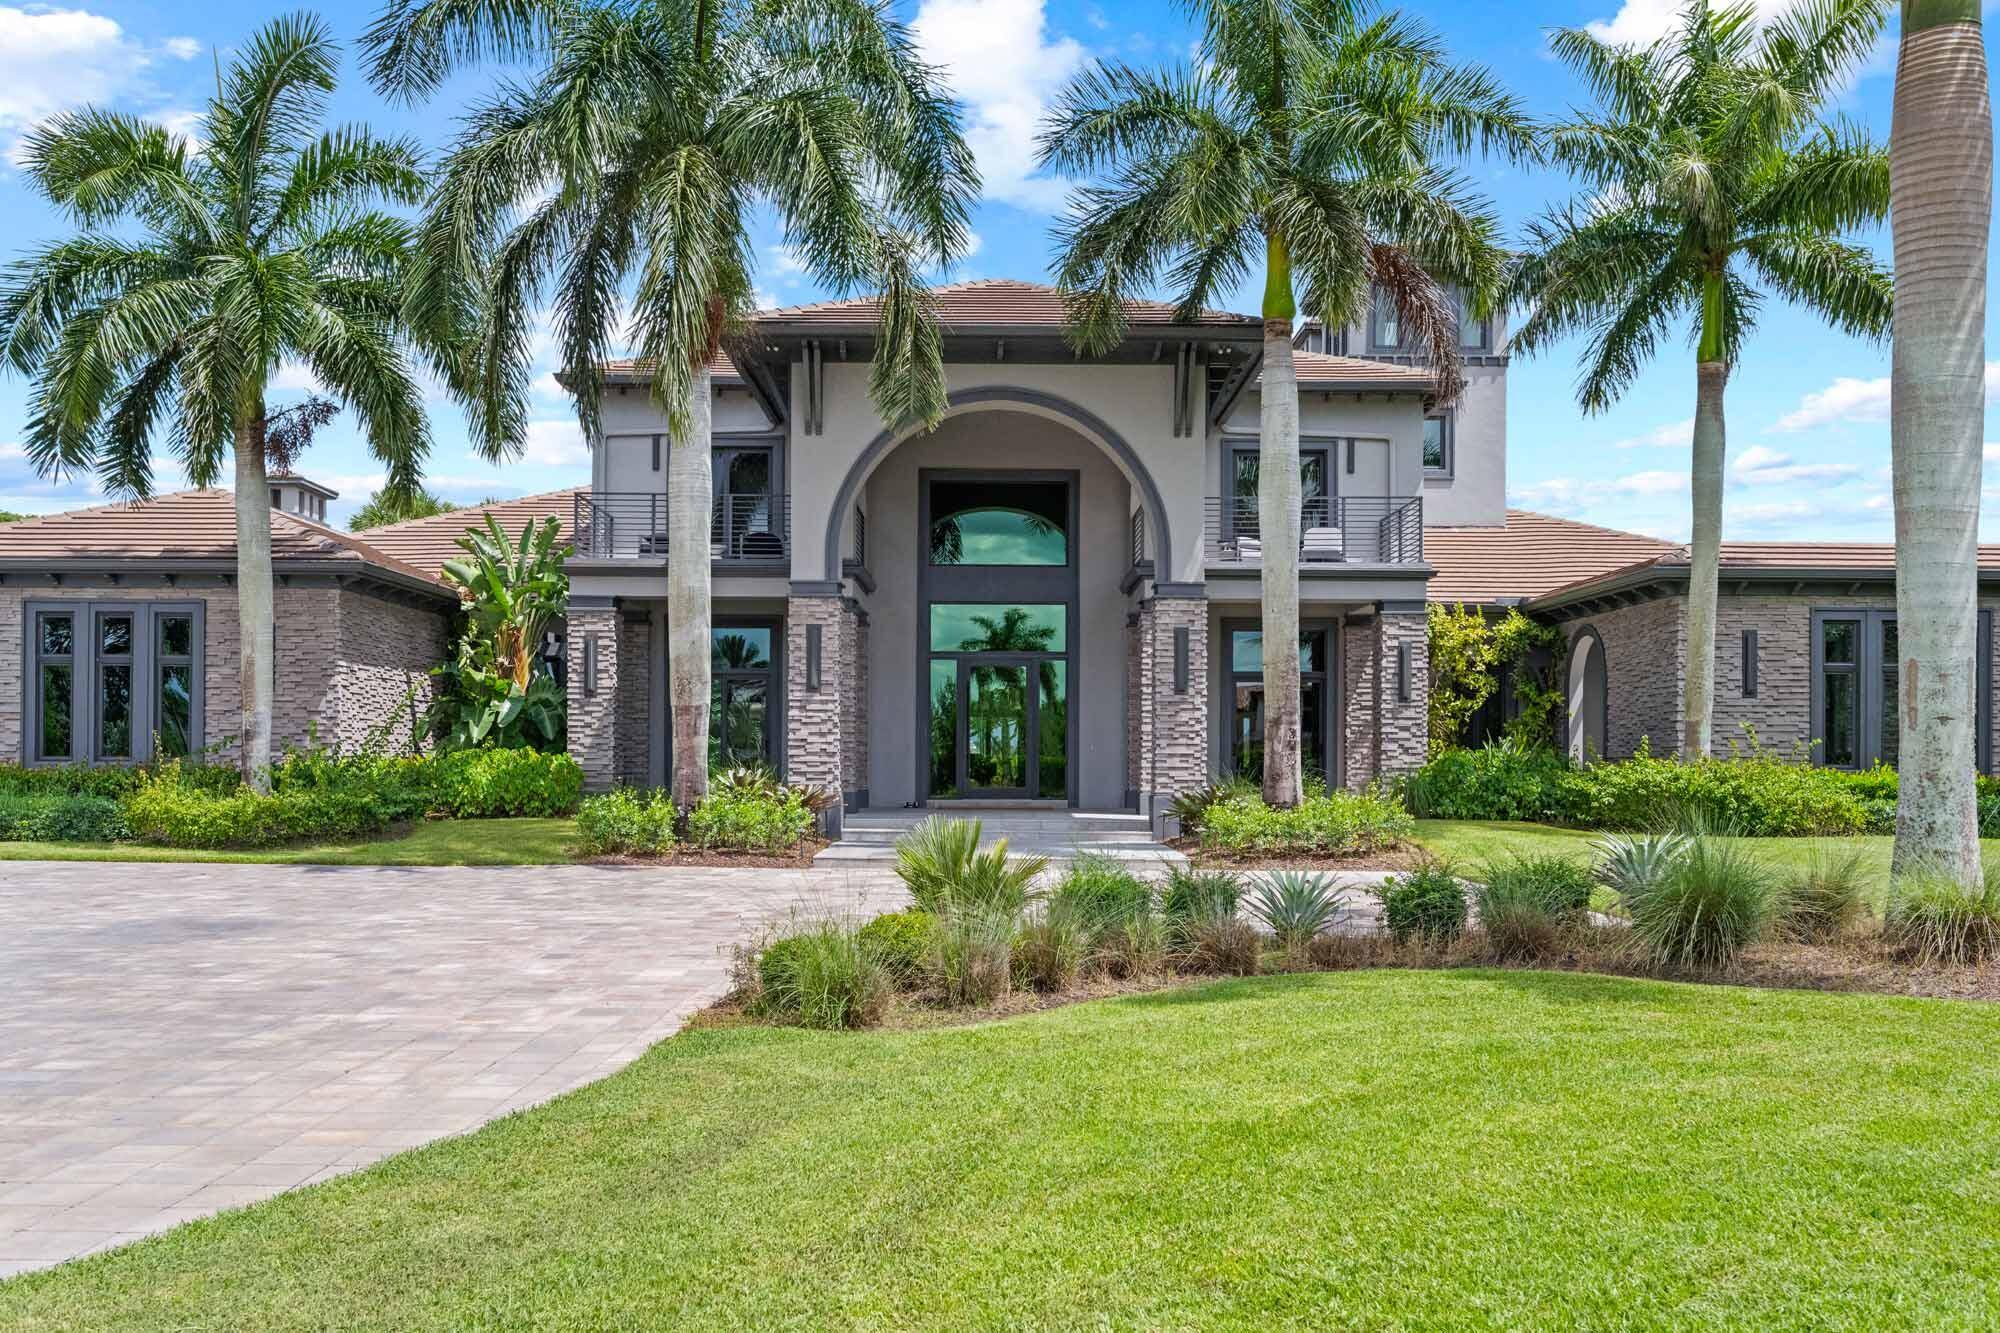 Set on 1. 63 acres, this extraordinary property boasts a sprawling 7983 square feet.